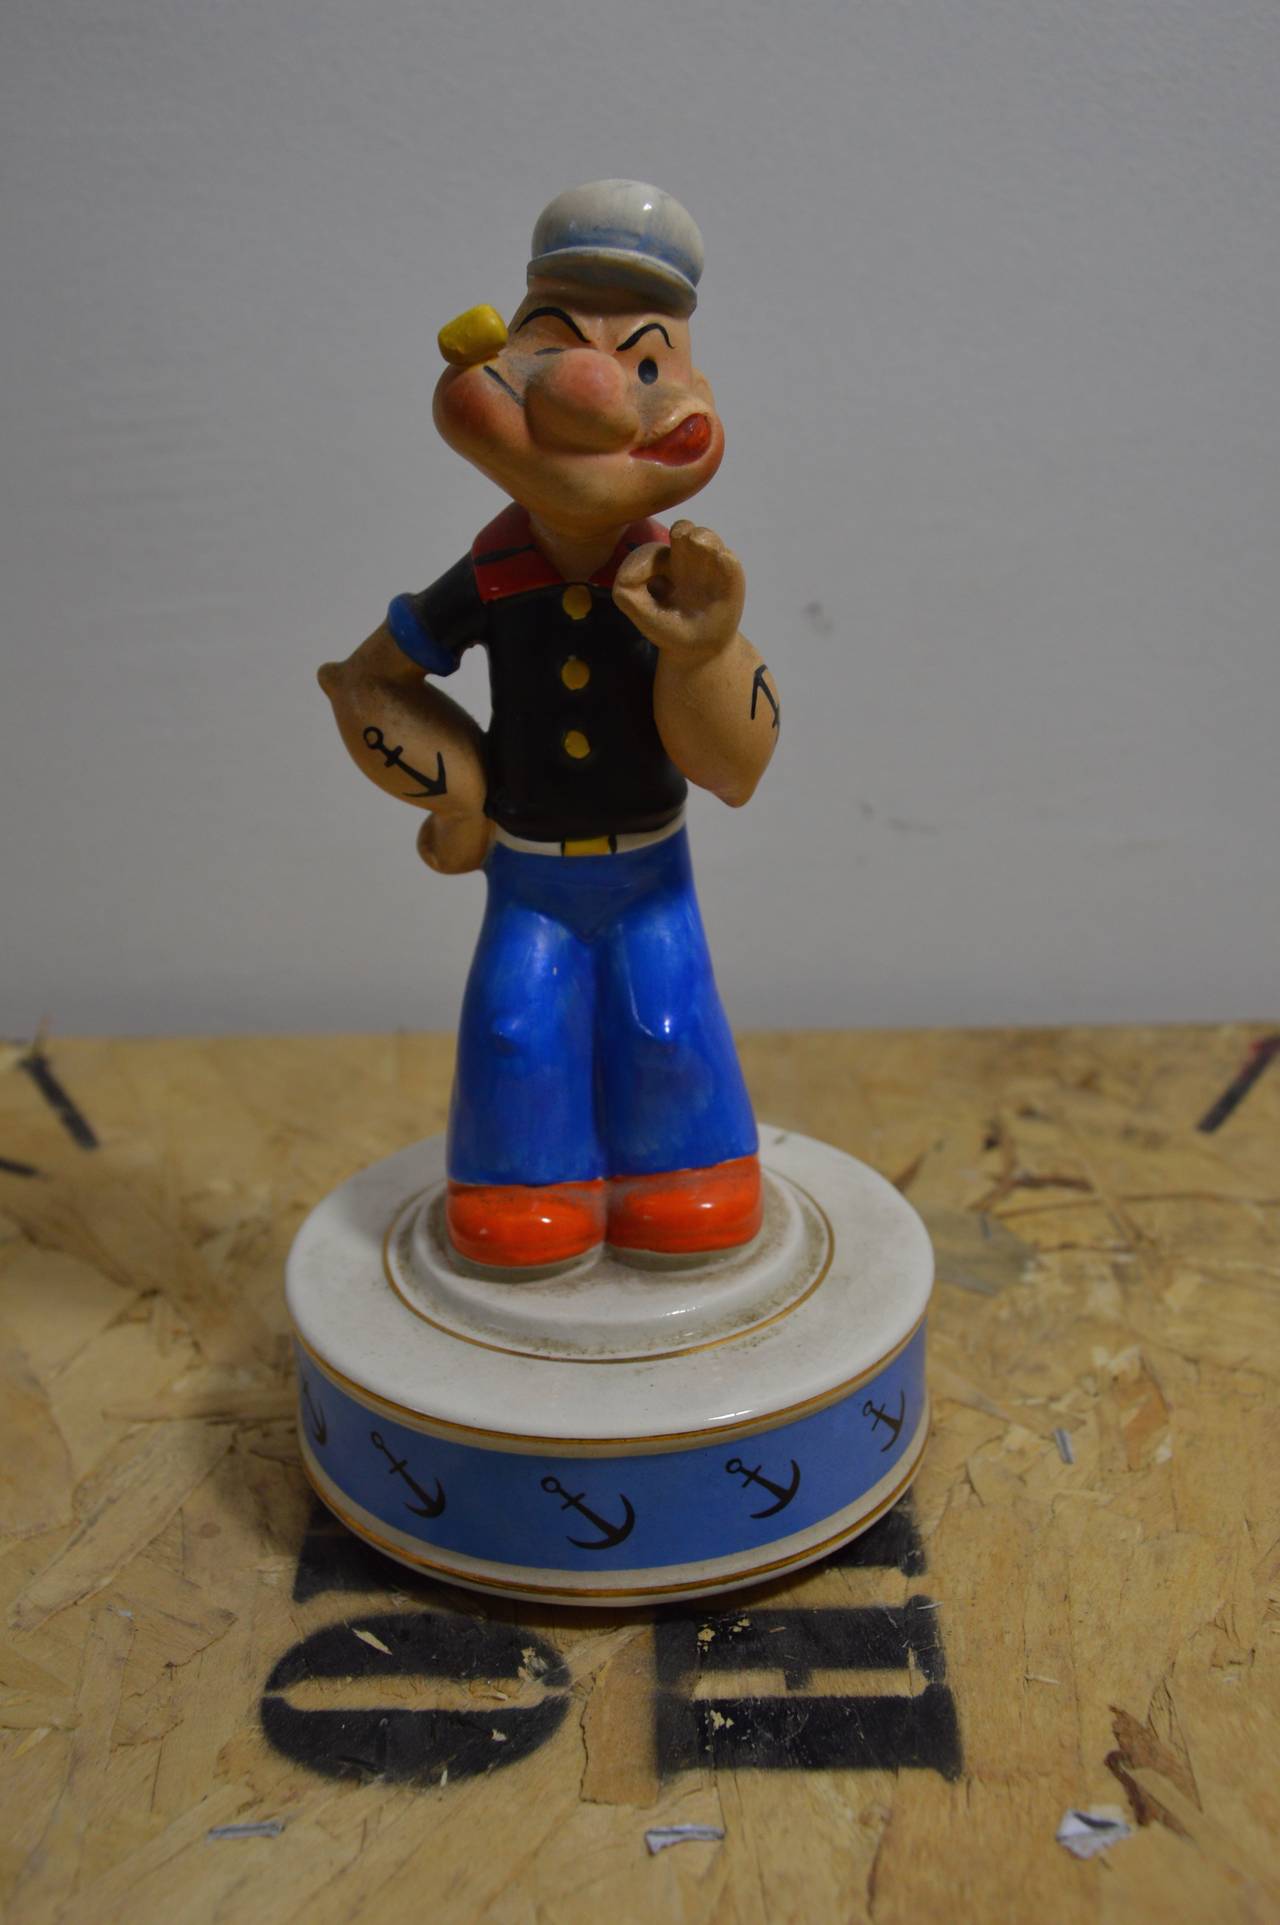 Olive and Popeye figurines in biscuit (white ceramic) with music mechanism on the bottom. Paint by hand, collector toys from the king features syndicate, the most popular american group of comics. 
They turn on a musical mechanism like dancers